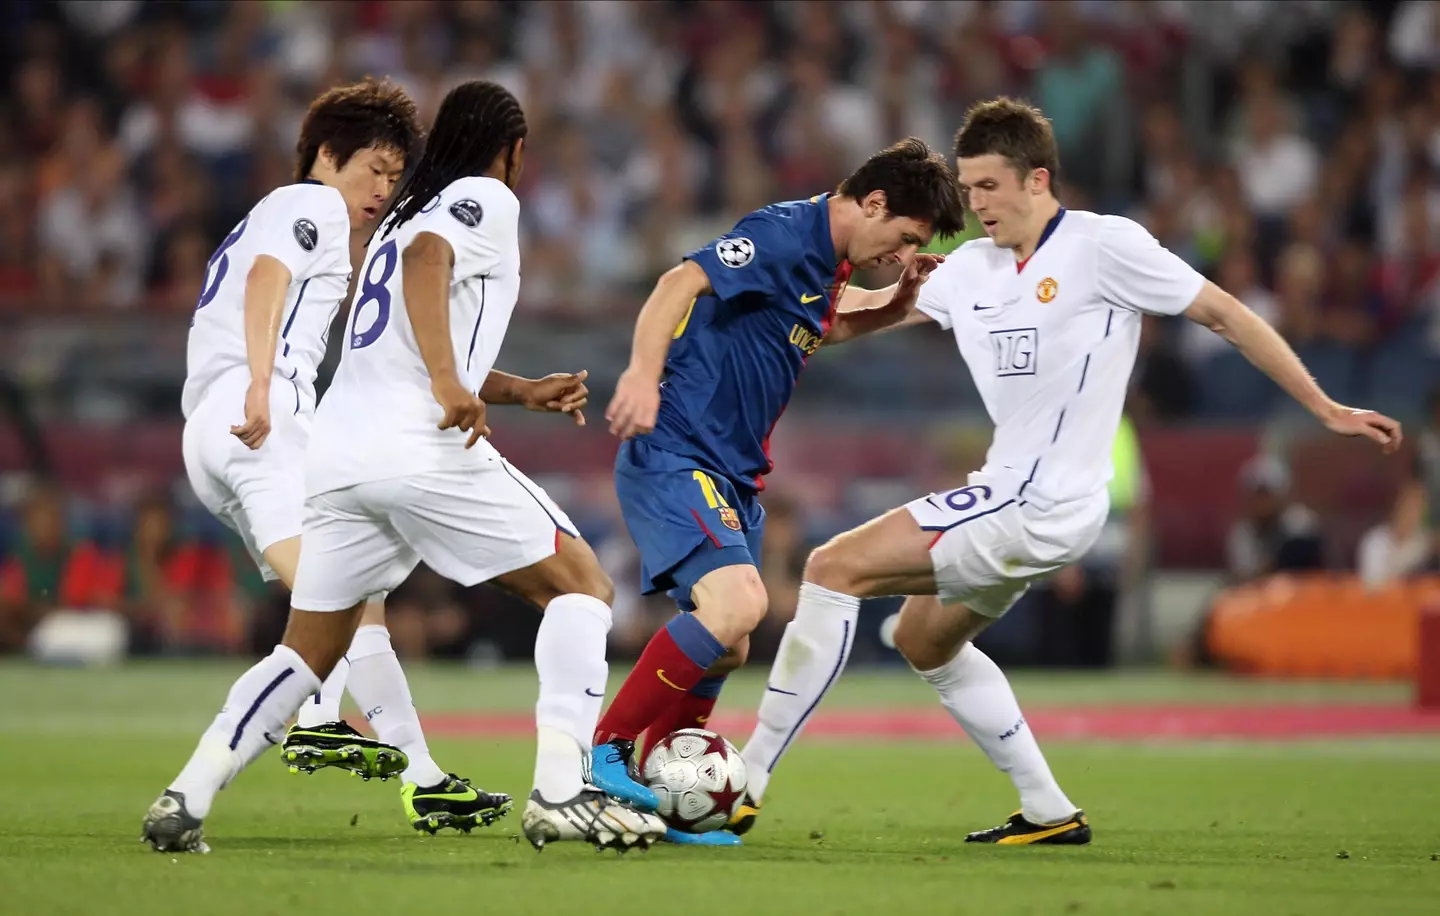 Messi during the 2009 Champions League final against Manchester United. (Image